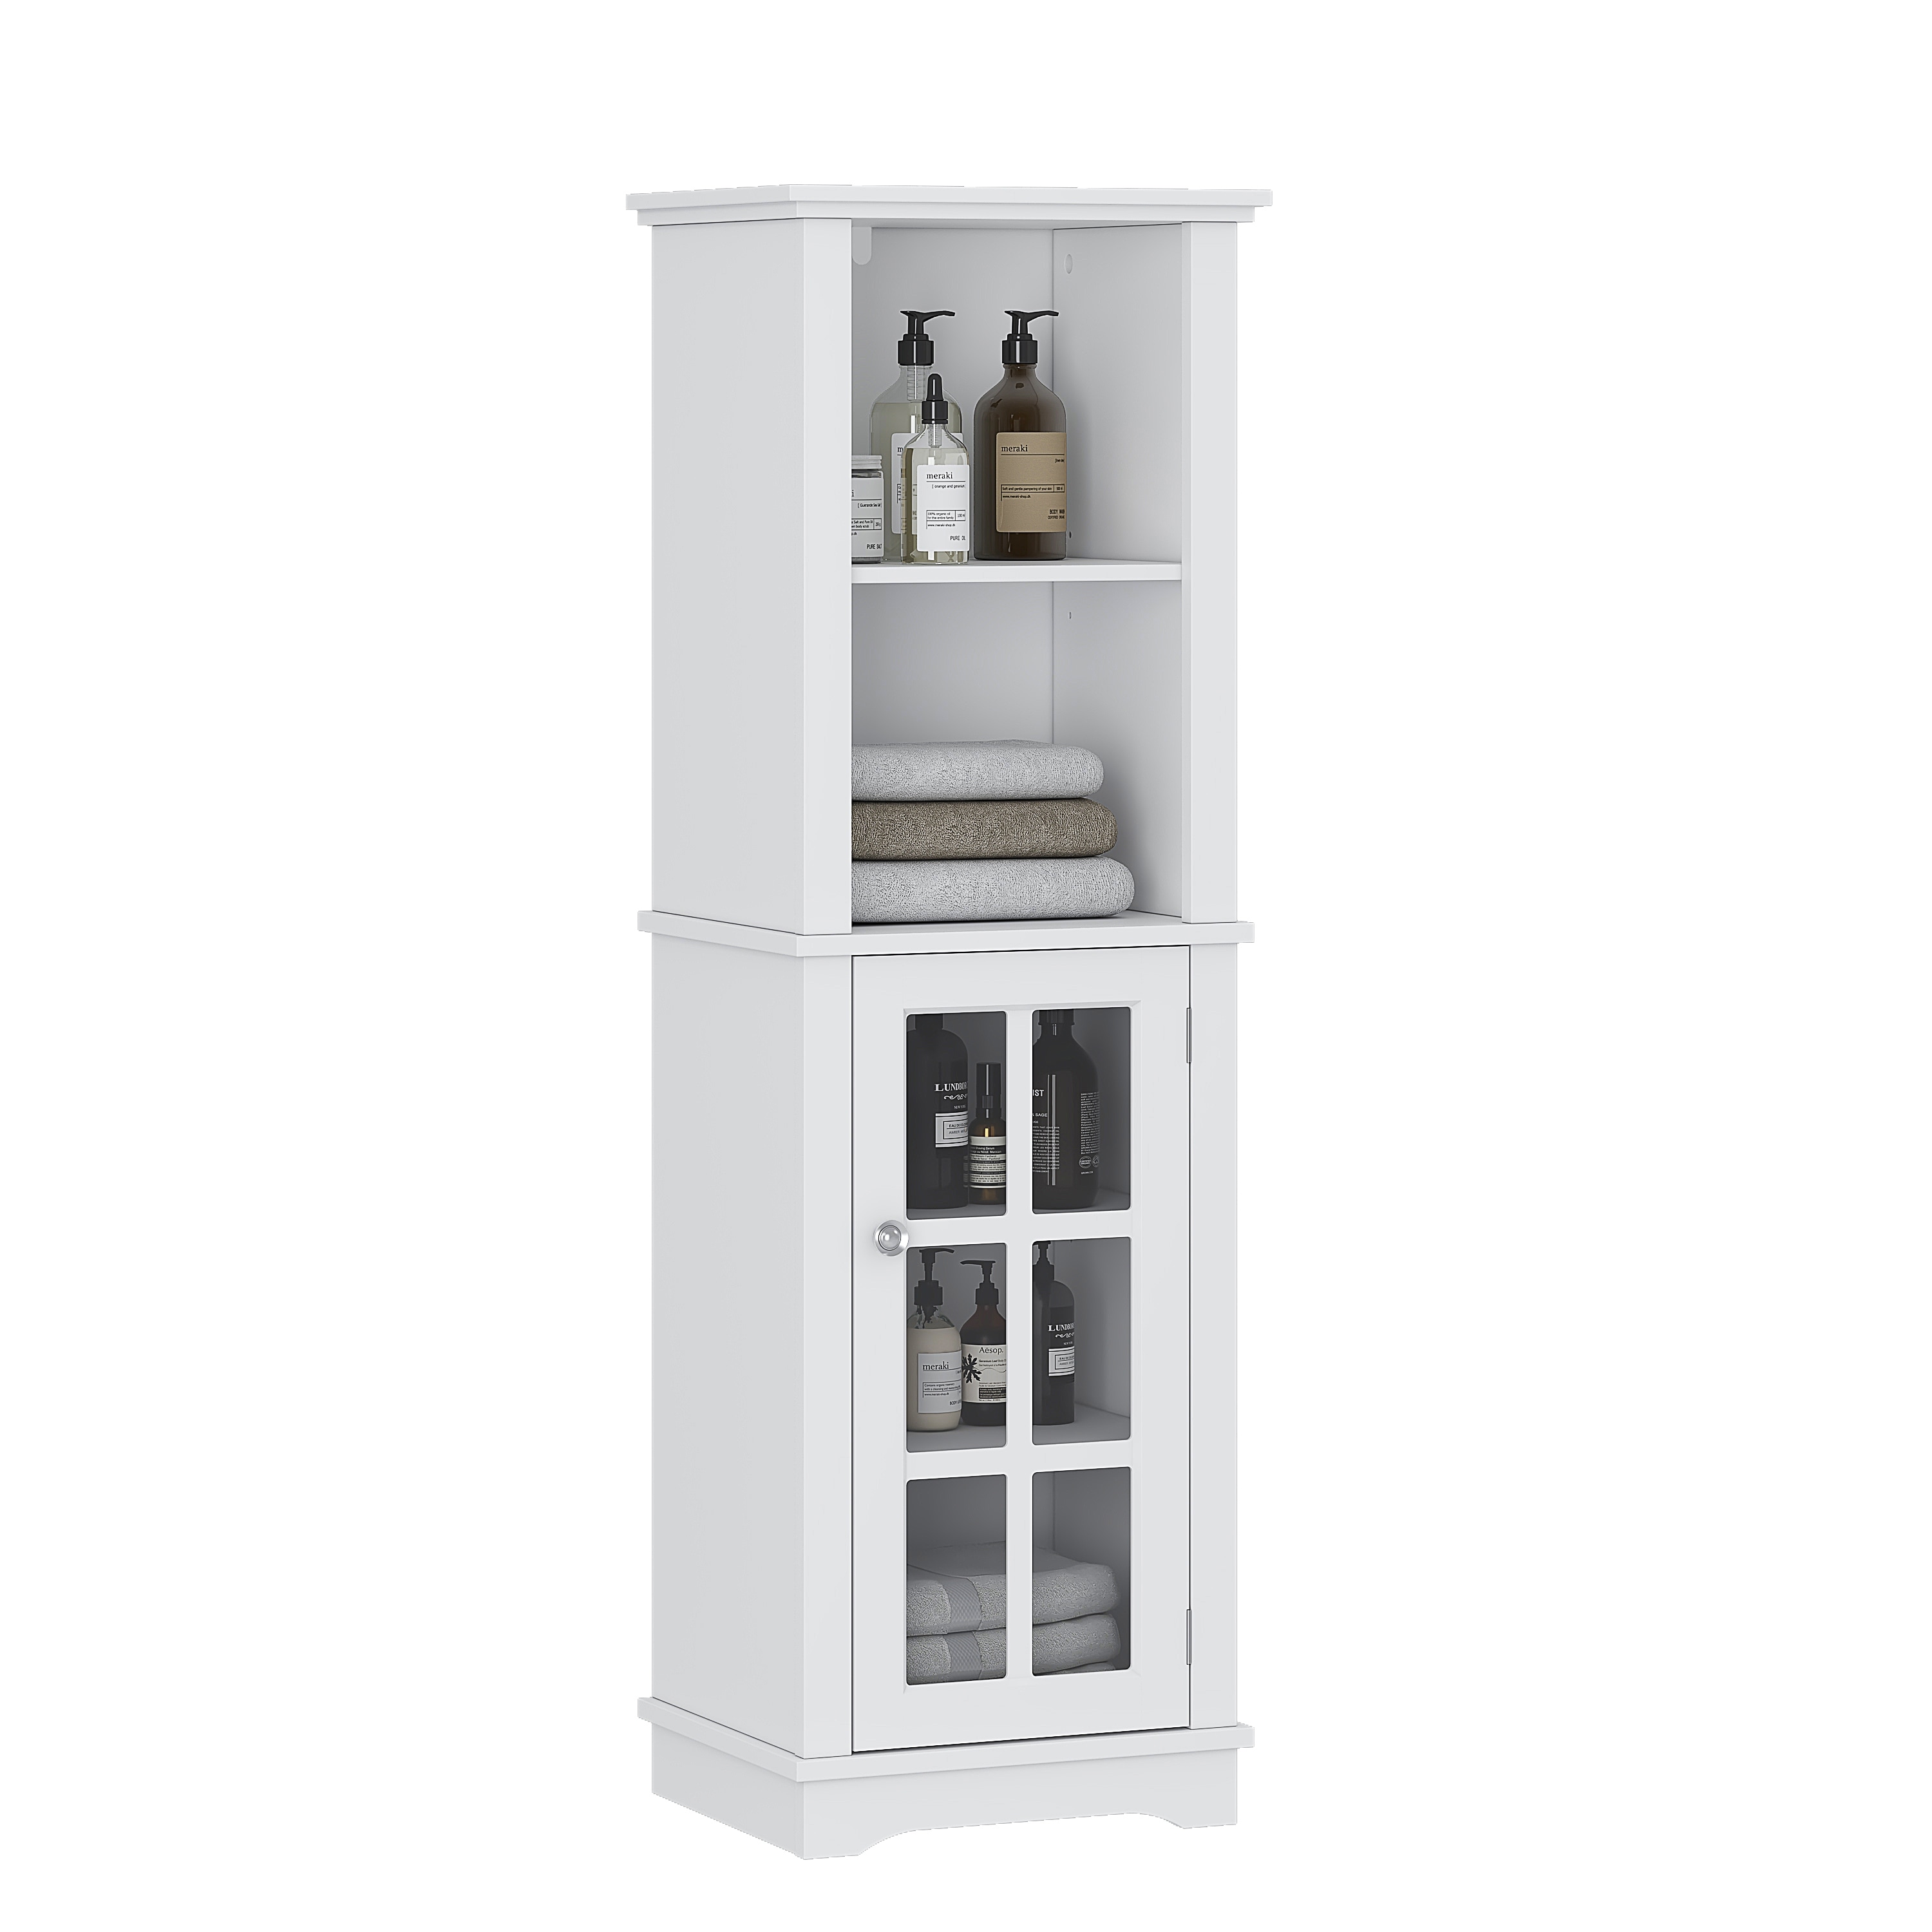 https://ak1.ostkcdn.com/images/products/is/images/direct/4b129612a9b921e1819d21ff05f5ebb63cdb4c55/Spirich-Home-Tall-Narrow-Storage-Cabinet%2C-Bathroom-Floor-Slim-Cabinet-with-Glass-Doors%2C-Freestanding-Linen-Tower%2C-White.jpg